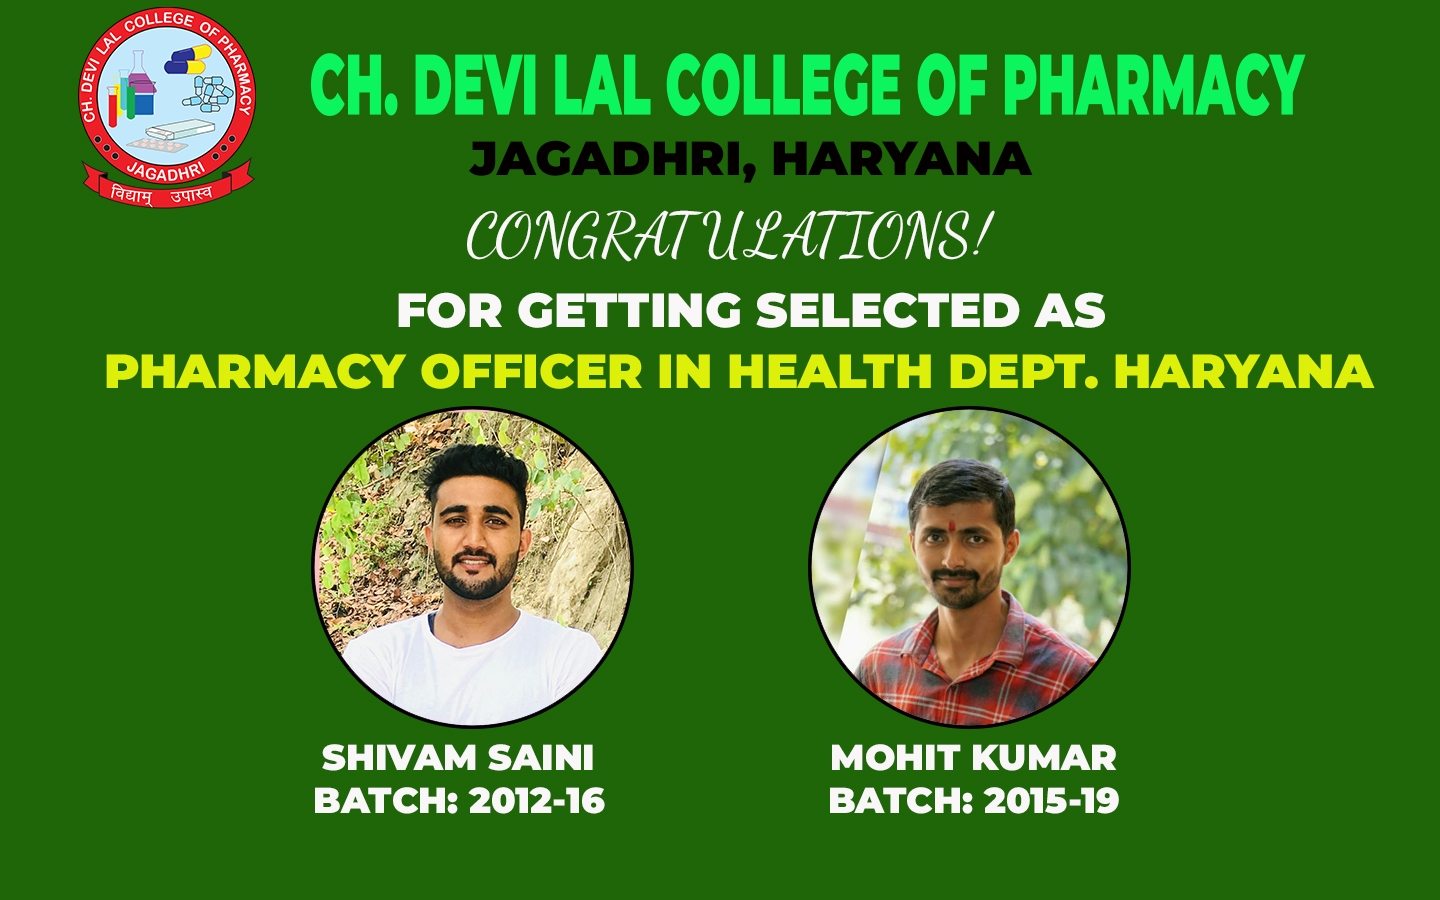 Two students selected as Pharmacy Officer